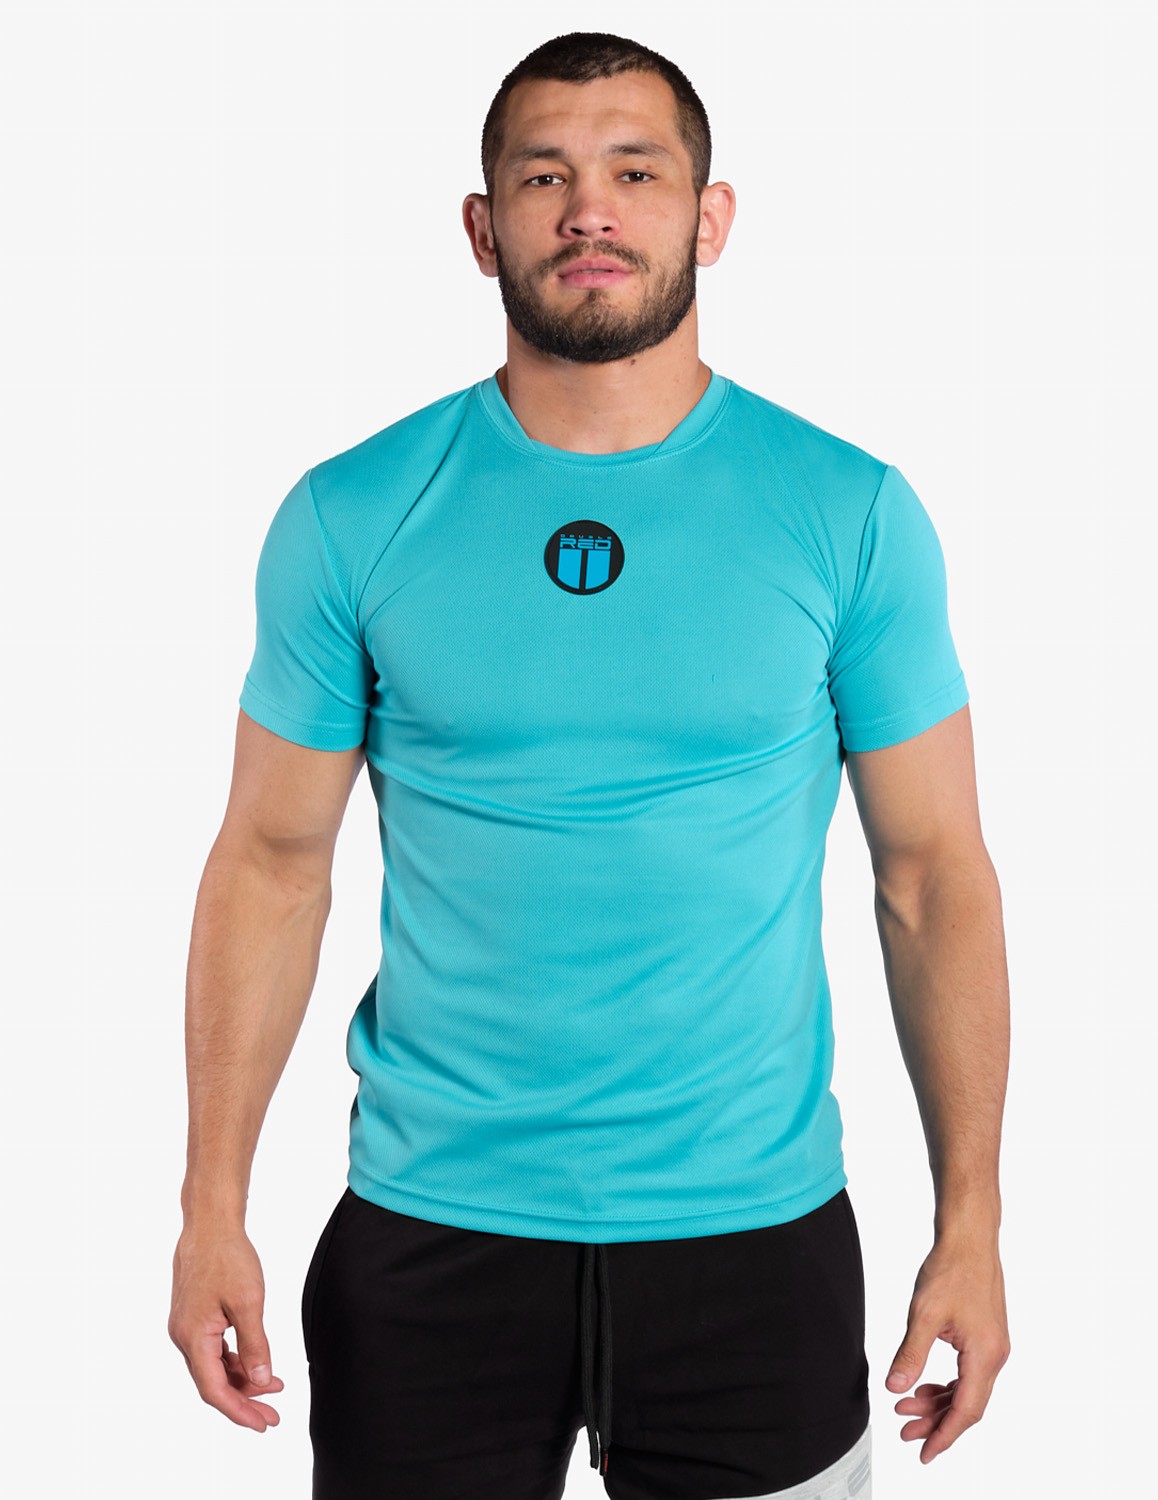 T-shirt SPORT IS YOUR GANG™ FIT+ Turquoise